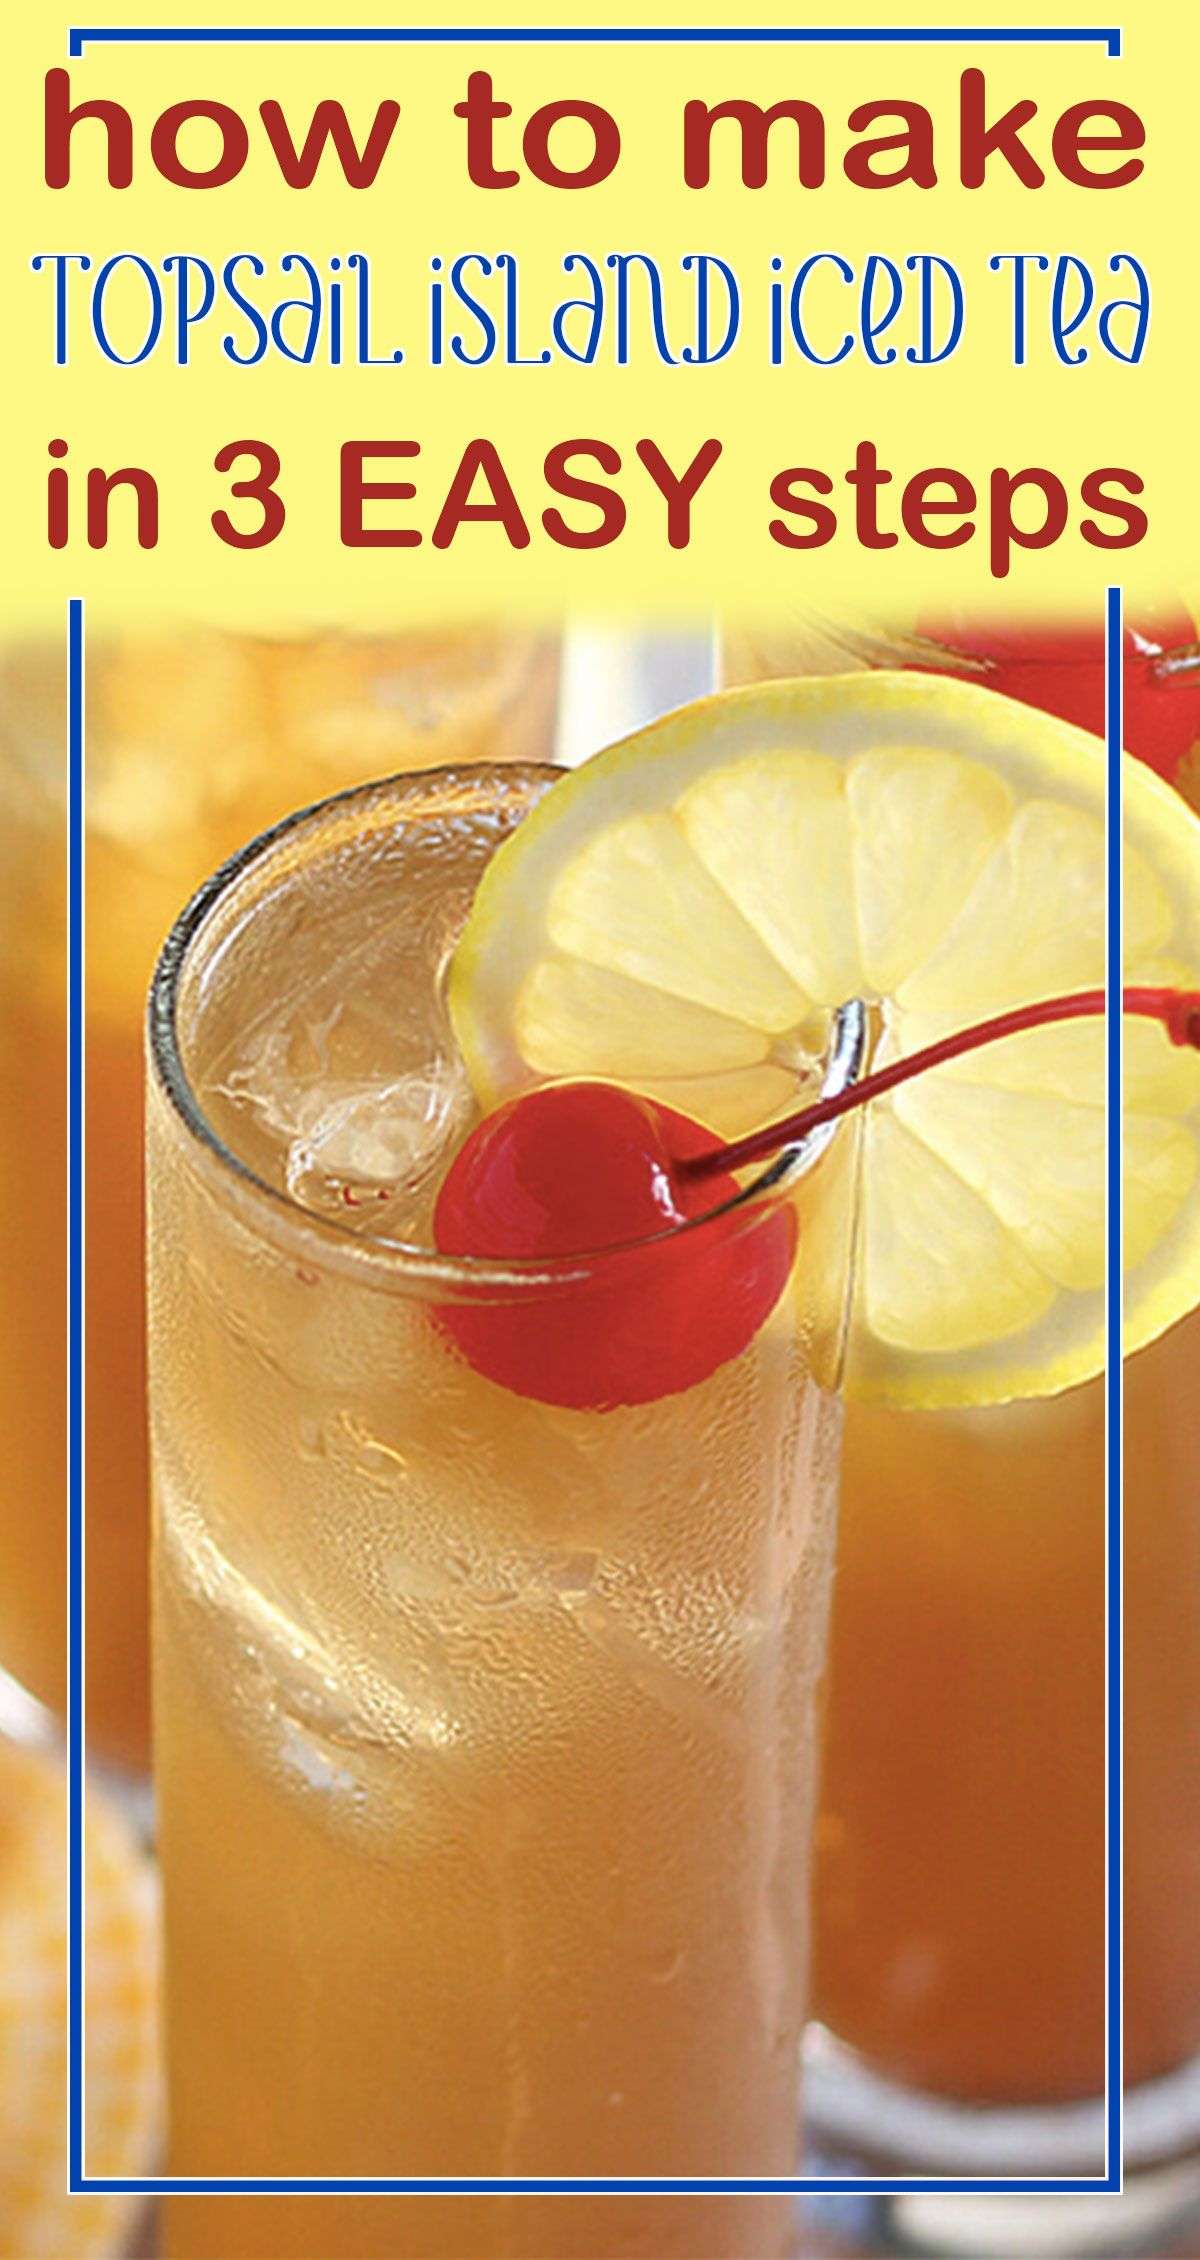 How to Make Topsail Island Iced Tea in 3 Easy Steps